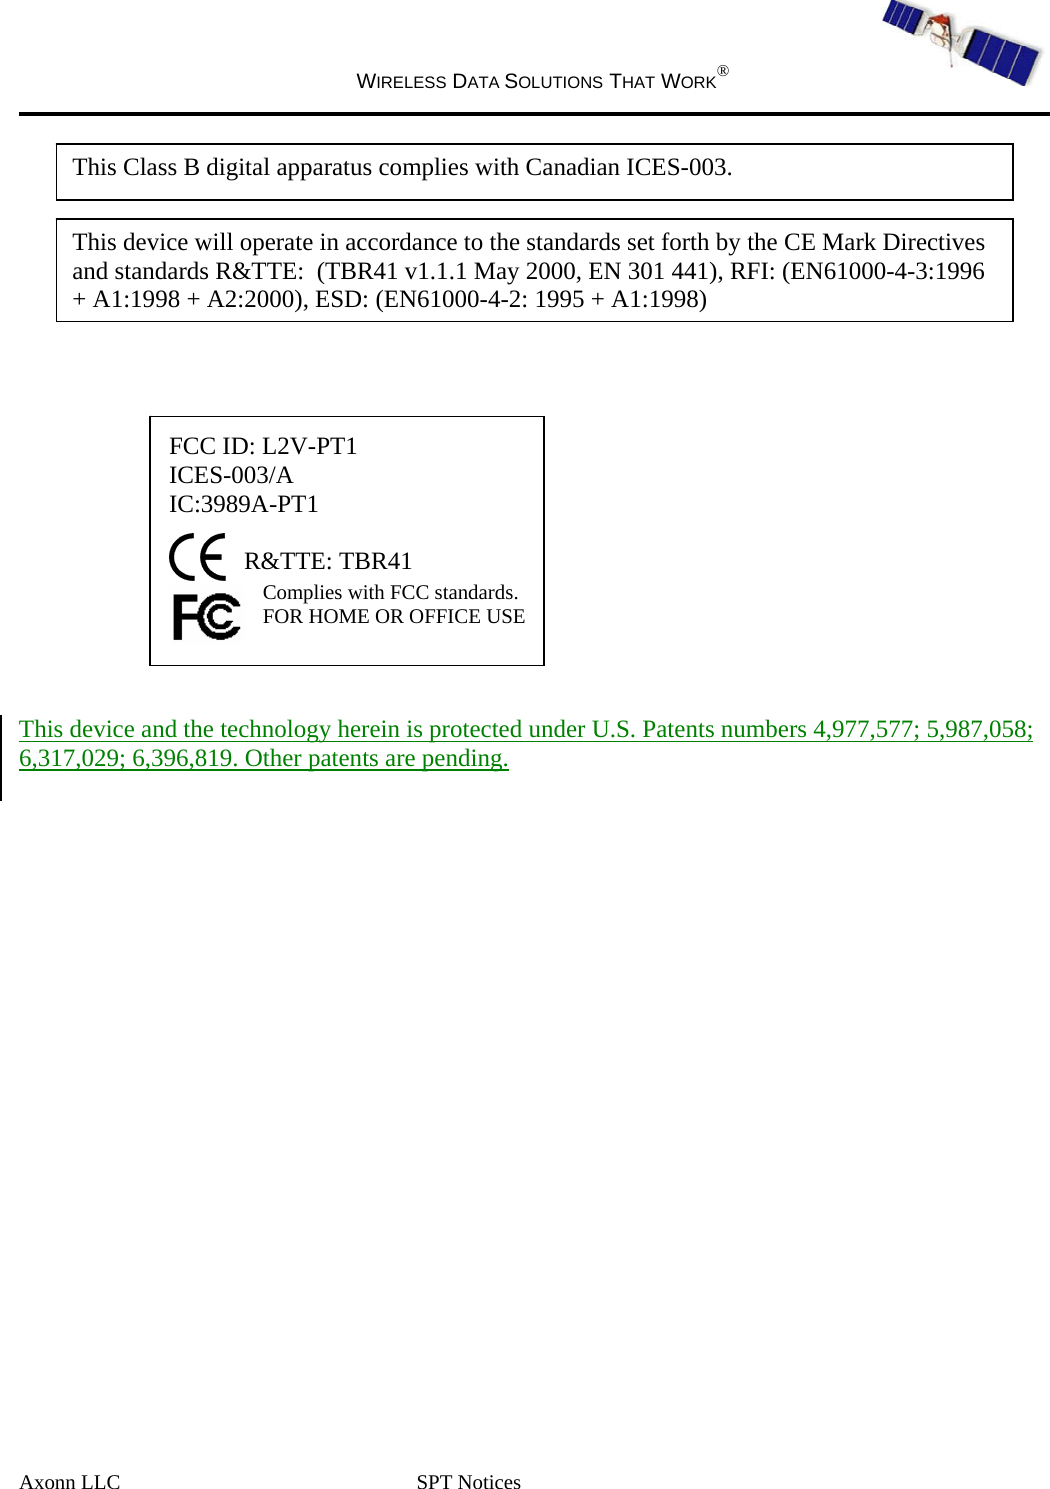  WIRELESS DATA SOLUTIONS THAT WORK®   Axonn LLC  SPT Notices             FCC ID: L2V-PT1 ICES-003/A IC:3989A-PT1  R&amp;TTE: TBR41 Complies with FCC standards.  FOR HOME OR OFFICE USE    This device and the technology herein is protected under U.S. Patents numbers 4,977,577; 5,987,058; 6,317,029; 6,396,819. Other patents are pending.   This device will operate in accordance to the standards set forth by the CE Mark Directives and standards R&amp;TTE:  (TBR41 v1.1.1 May 2000, EN 301 441), RFI: (EN61000-4-3:1996 + A1:1998 + A2:2000), ESD: (EN61000-4-2: 1995 + A1:1998)This Class B digital apparatus complies with Canadian ICES-003. 